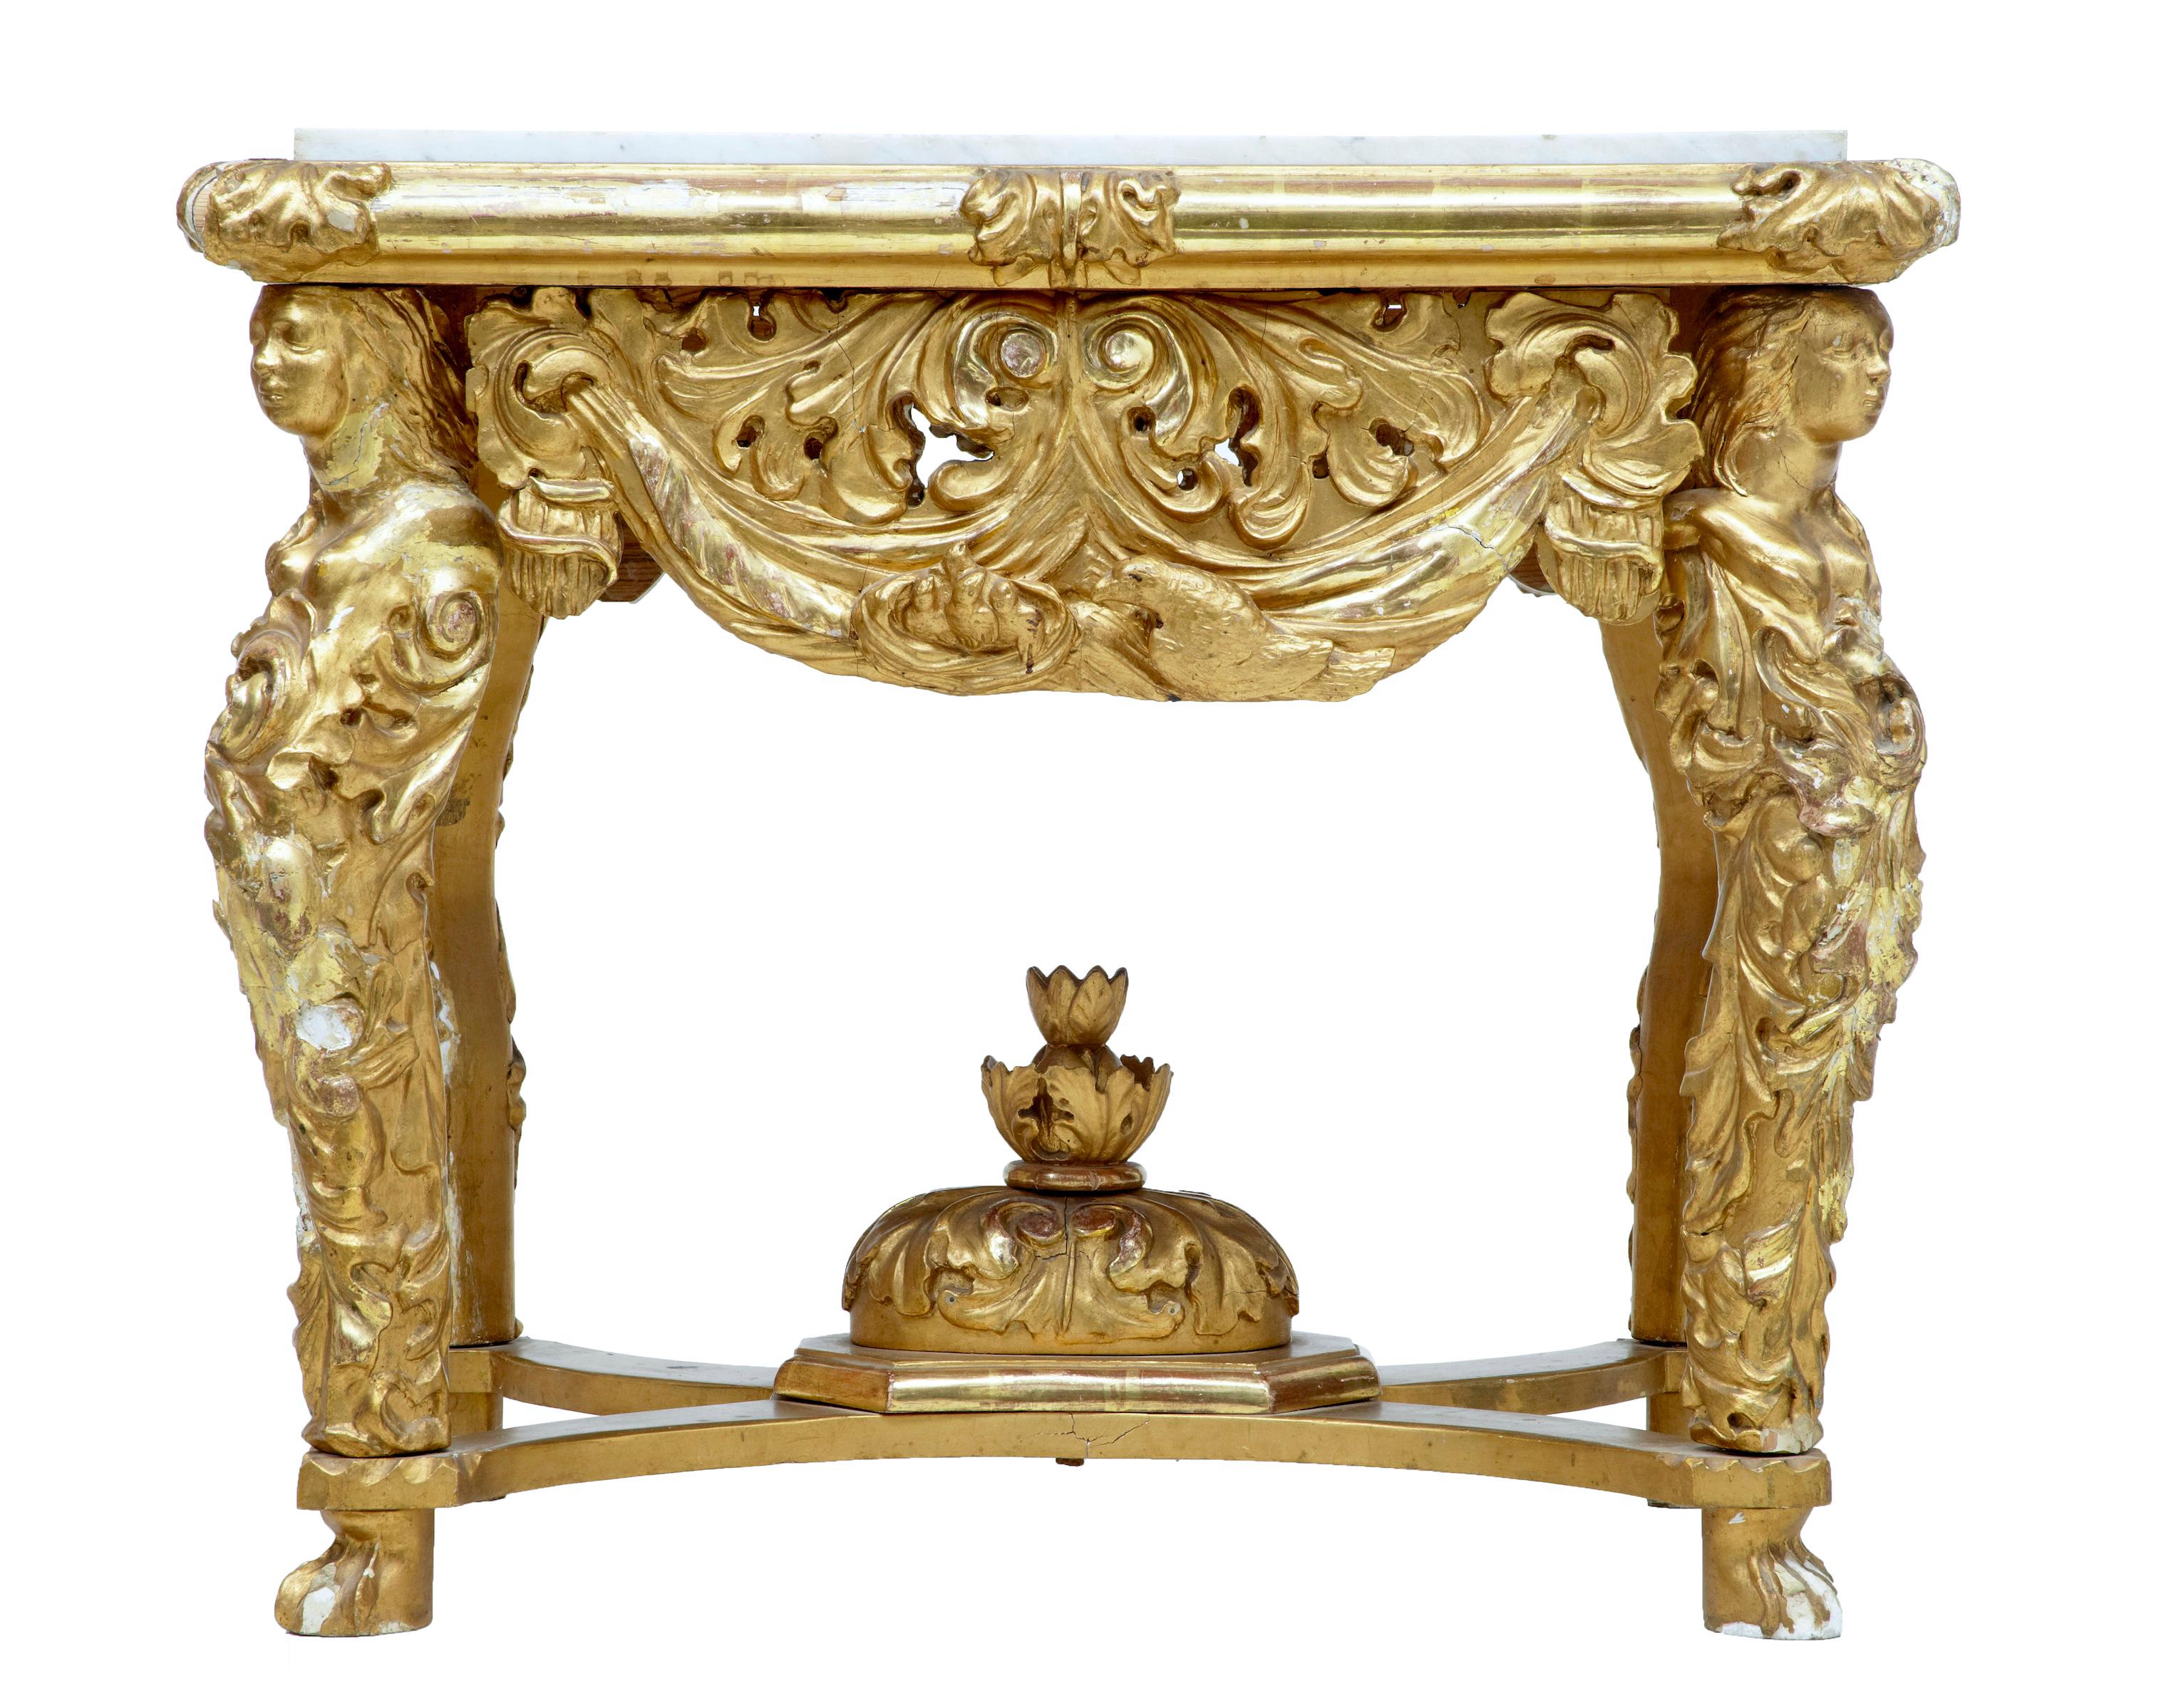 19th century carved wood and gilt center table, possibly Italian, circa 1850. Inset marble white grey veined top. Sides adorned with swags and scrolls. Each leg with carved female bust, with flowing acanthus leaves. Central decoration located in the